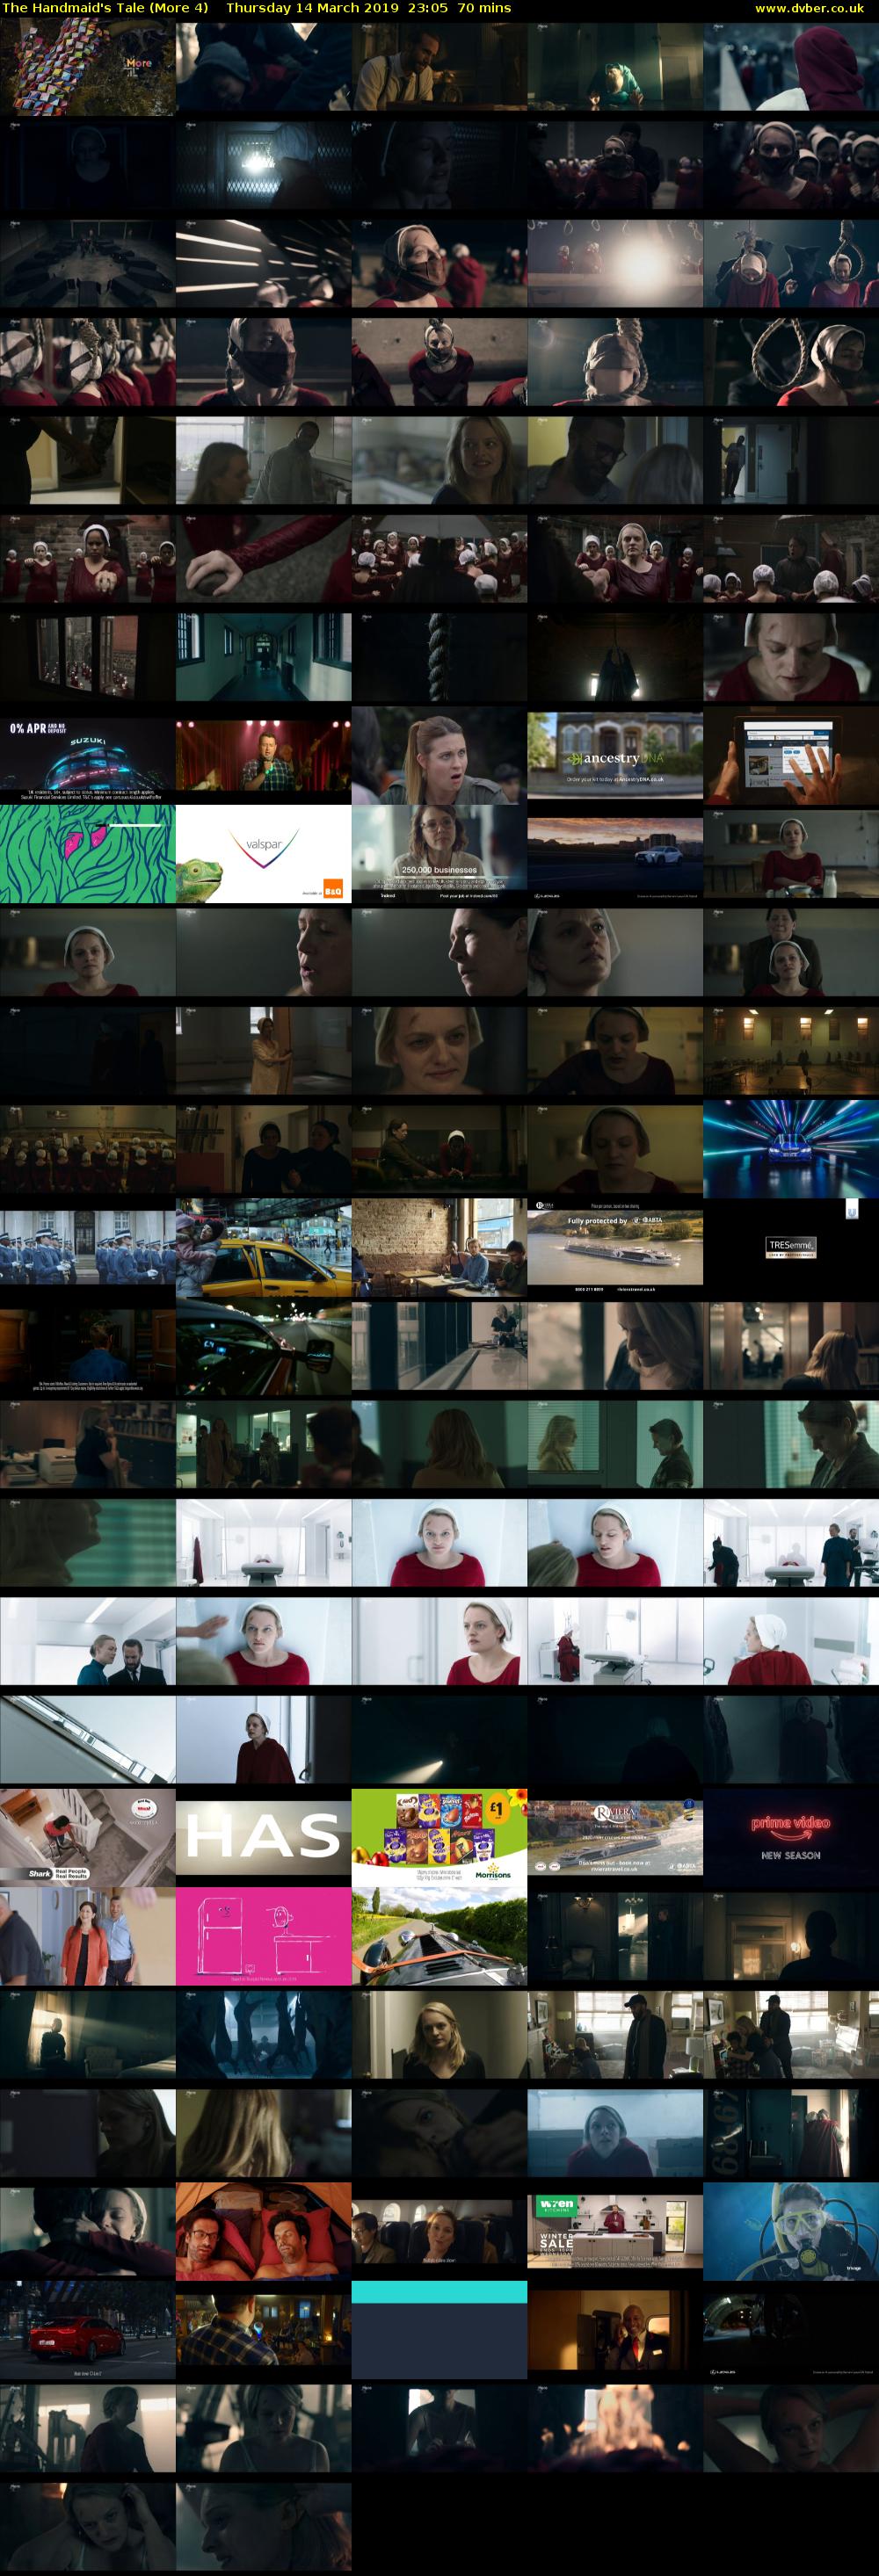 The Handmaid's Tale (More 4) Thursday 14 March 2019 23:05 - 00:15